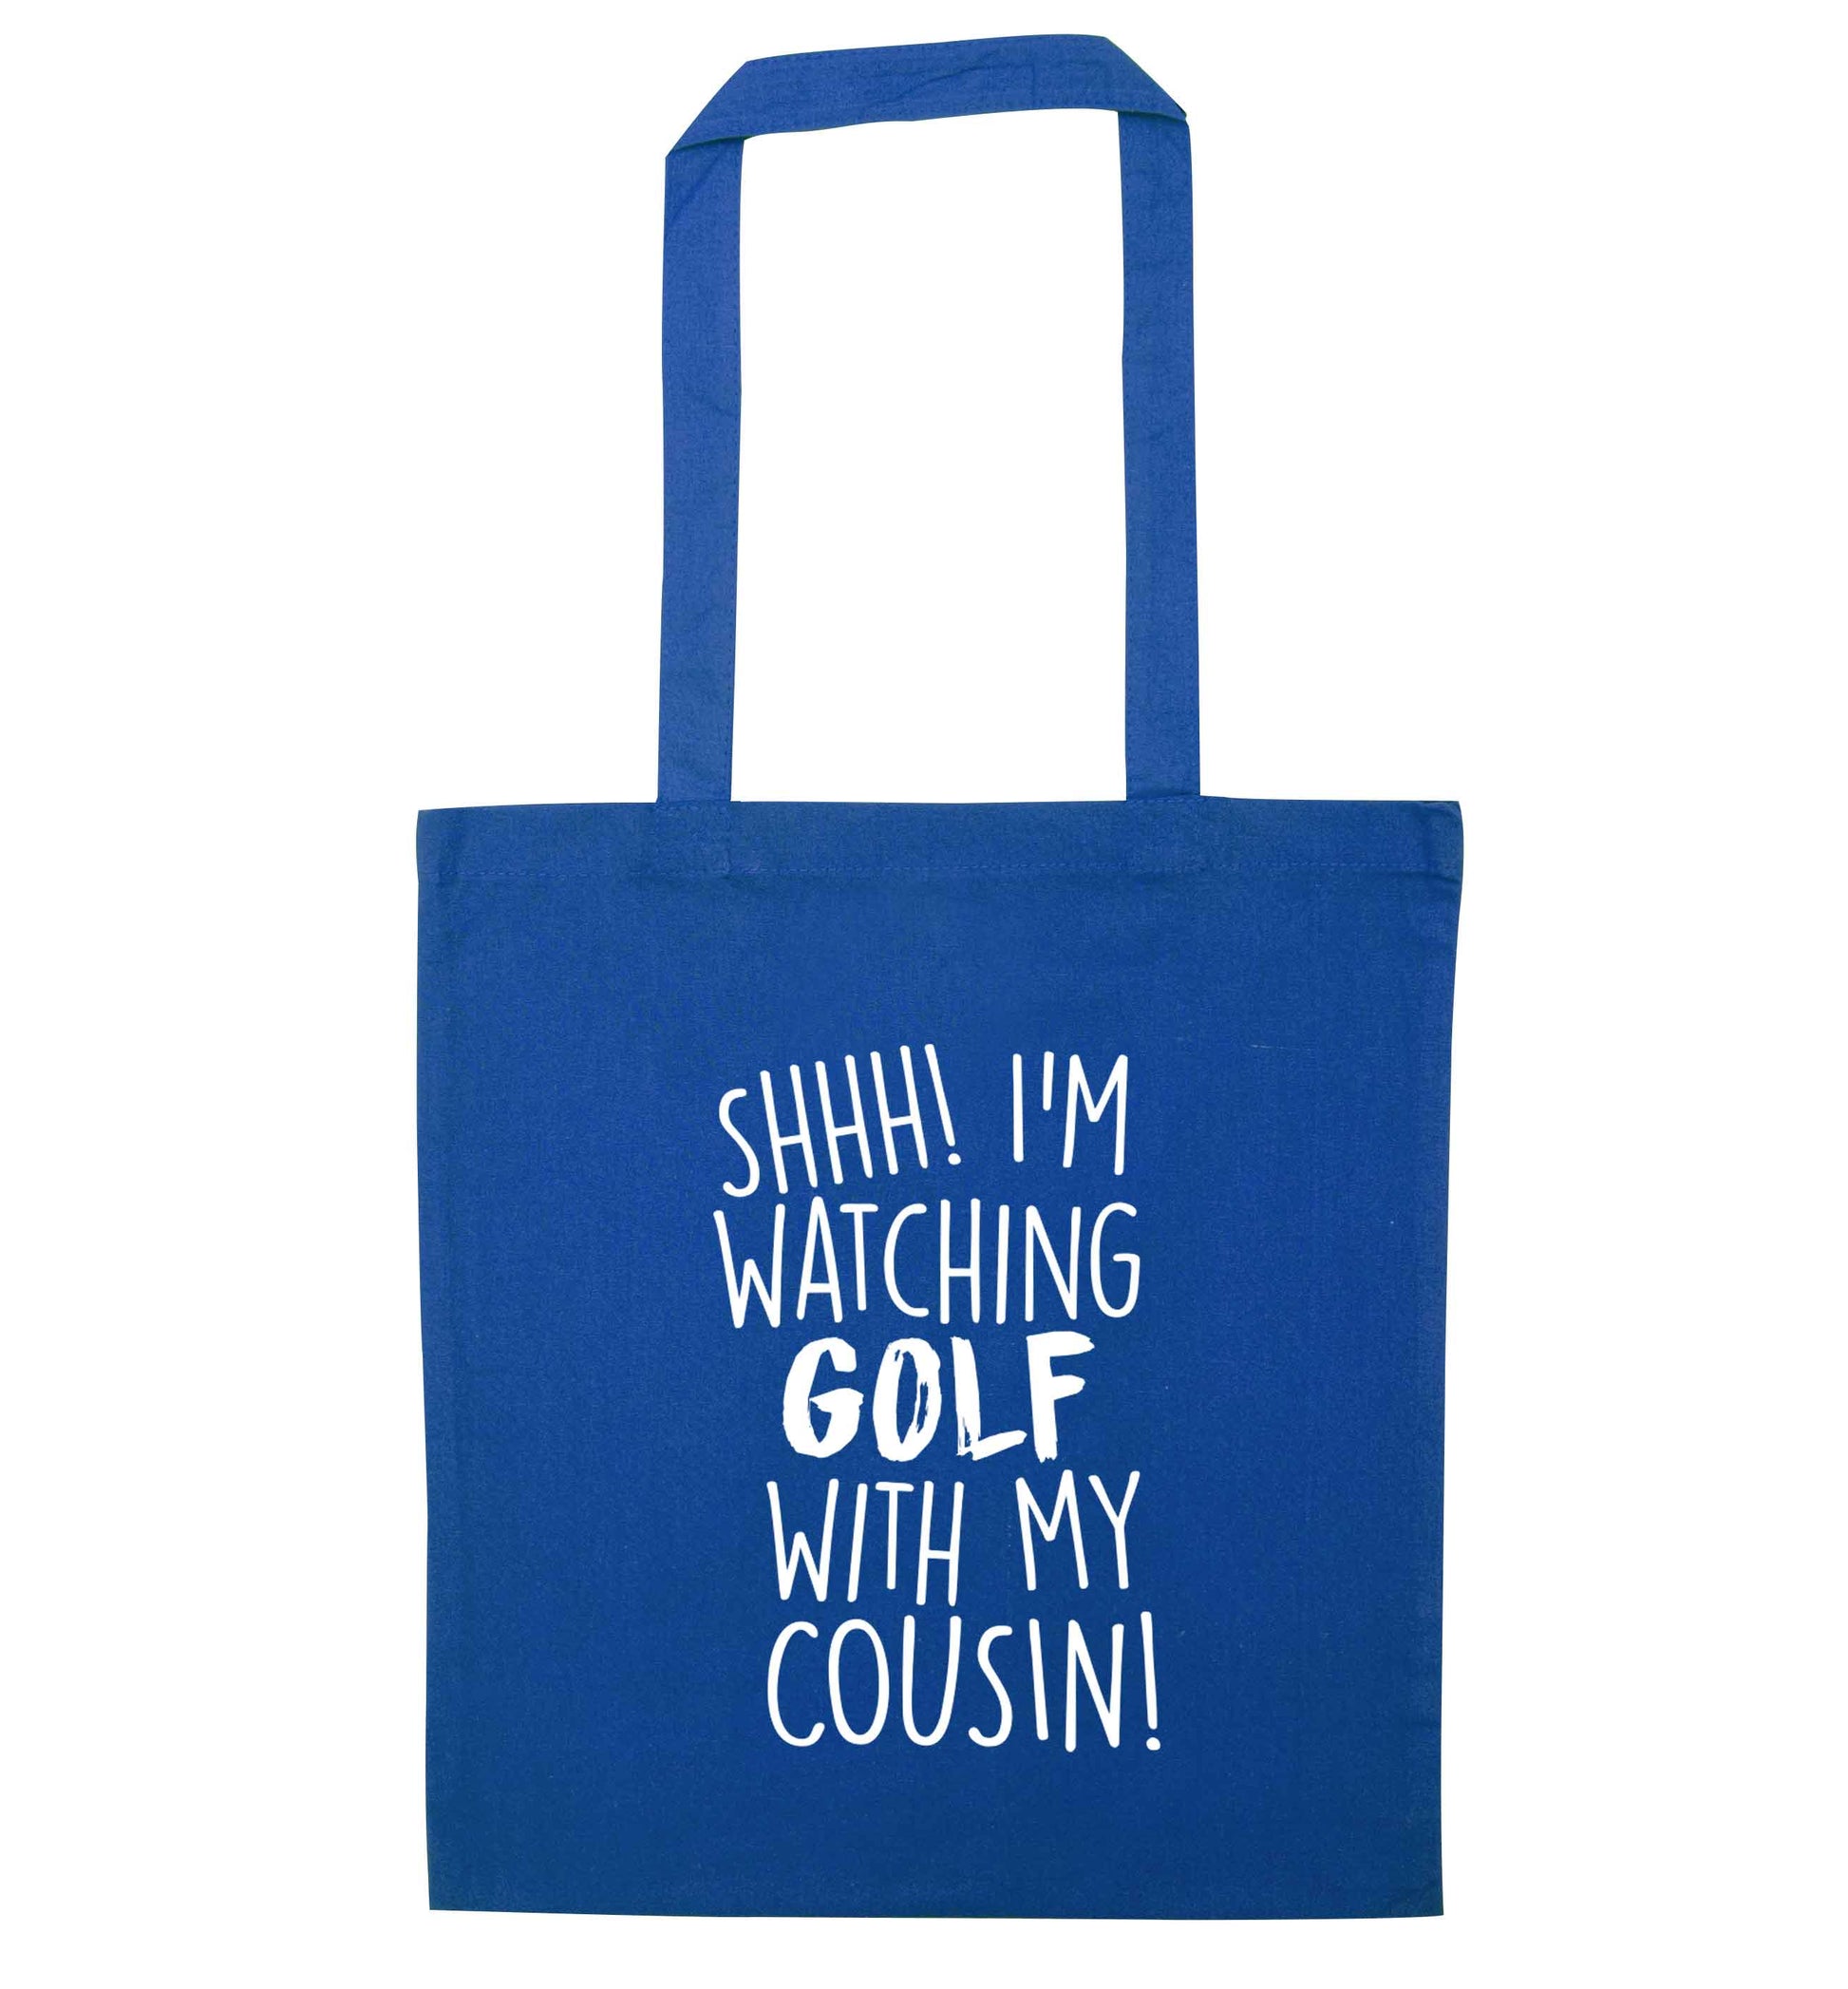 Shh I'm watching golf with my cousin blue tote bag